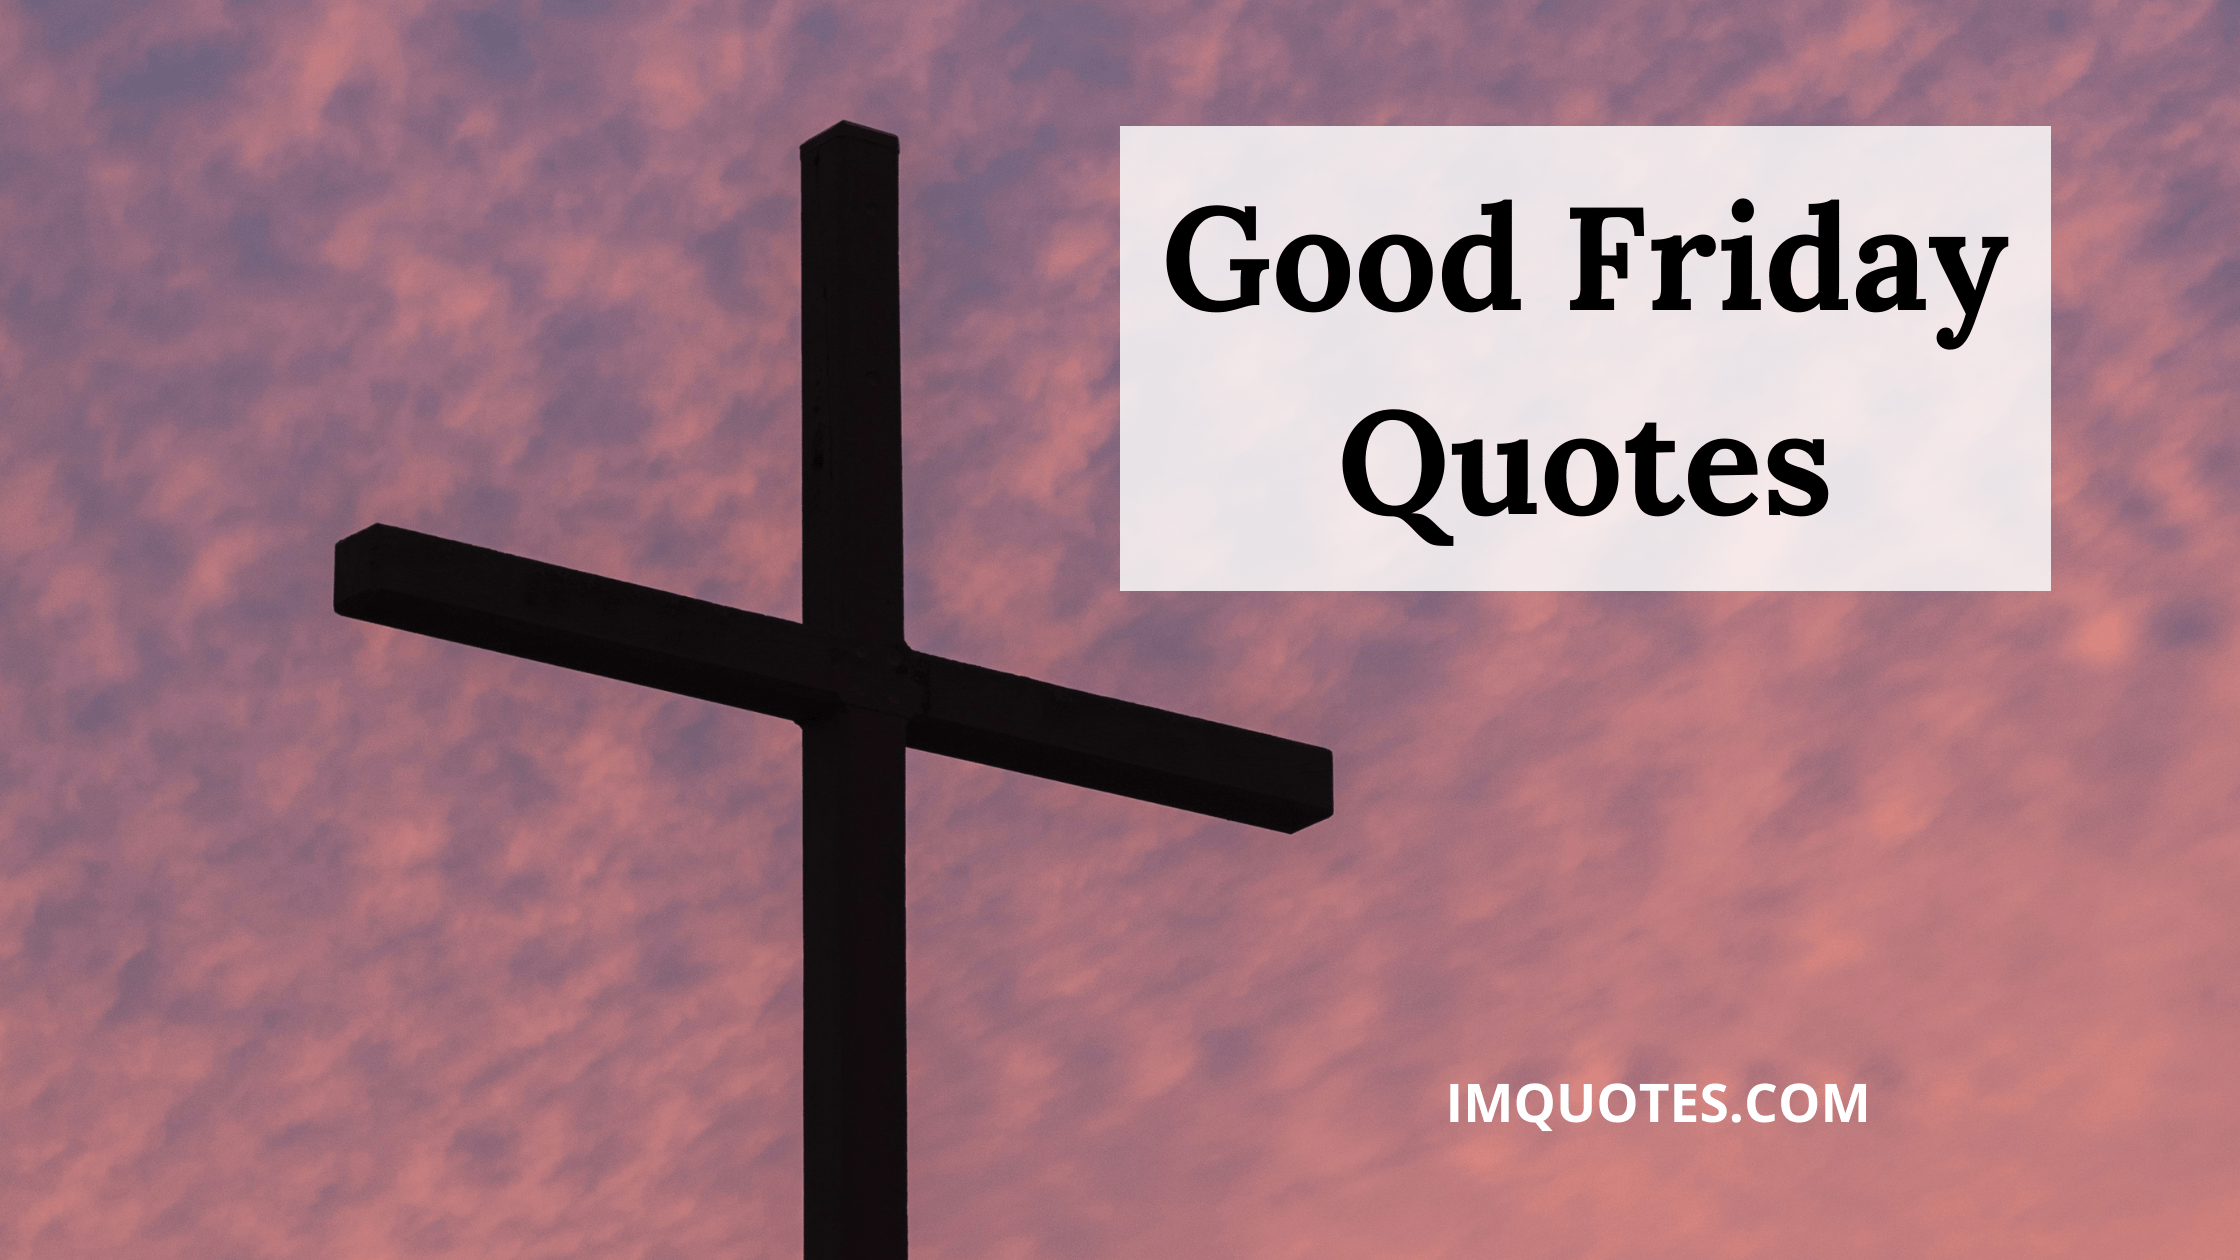 Good Friday Quotes1